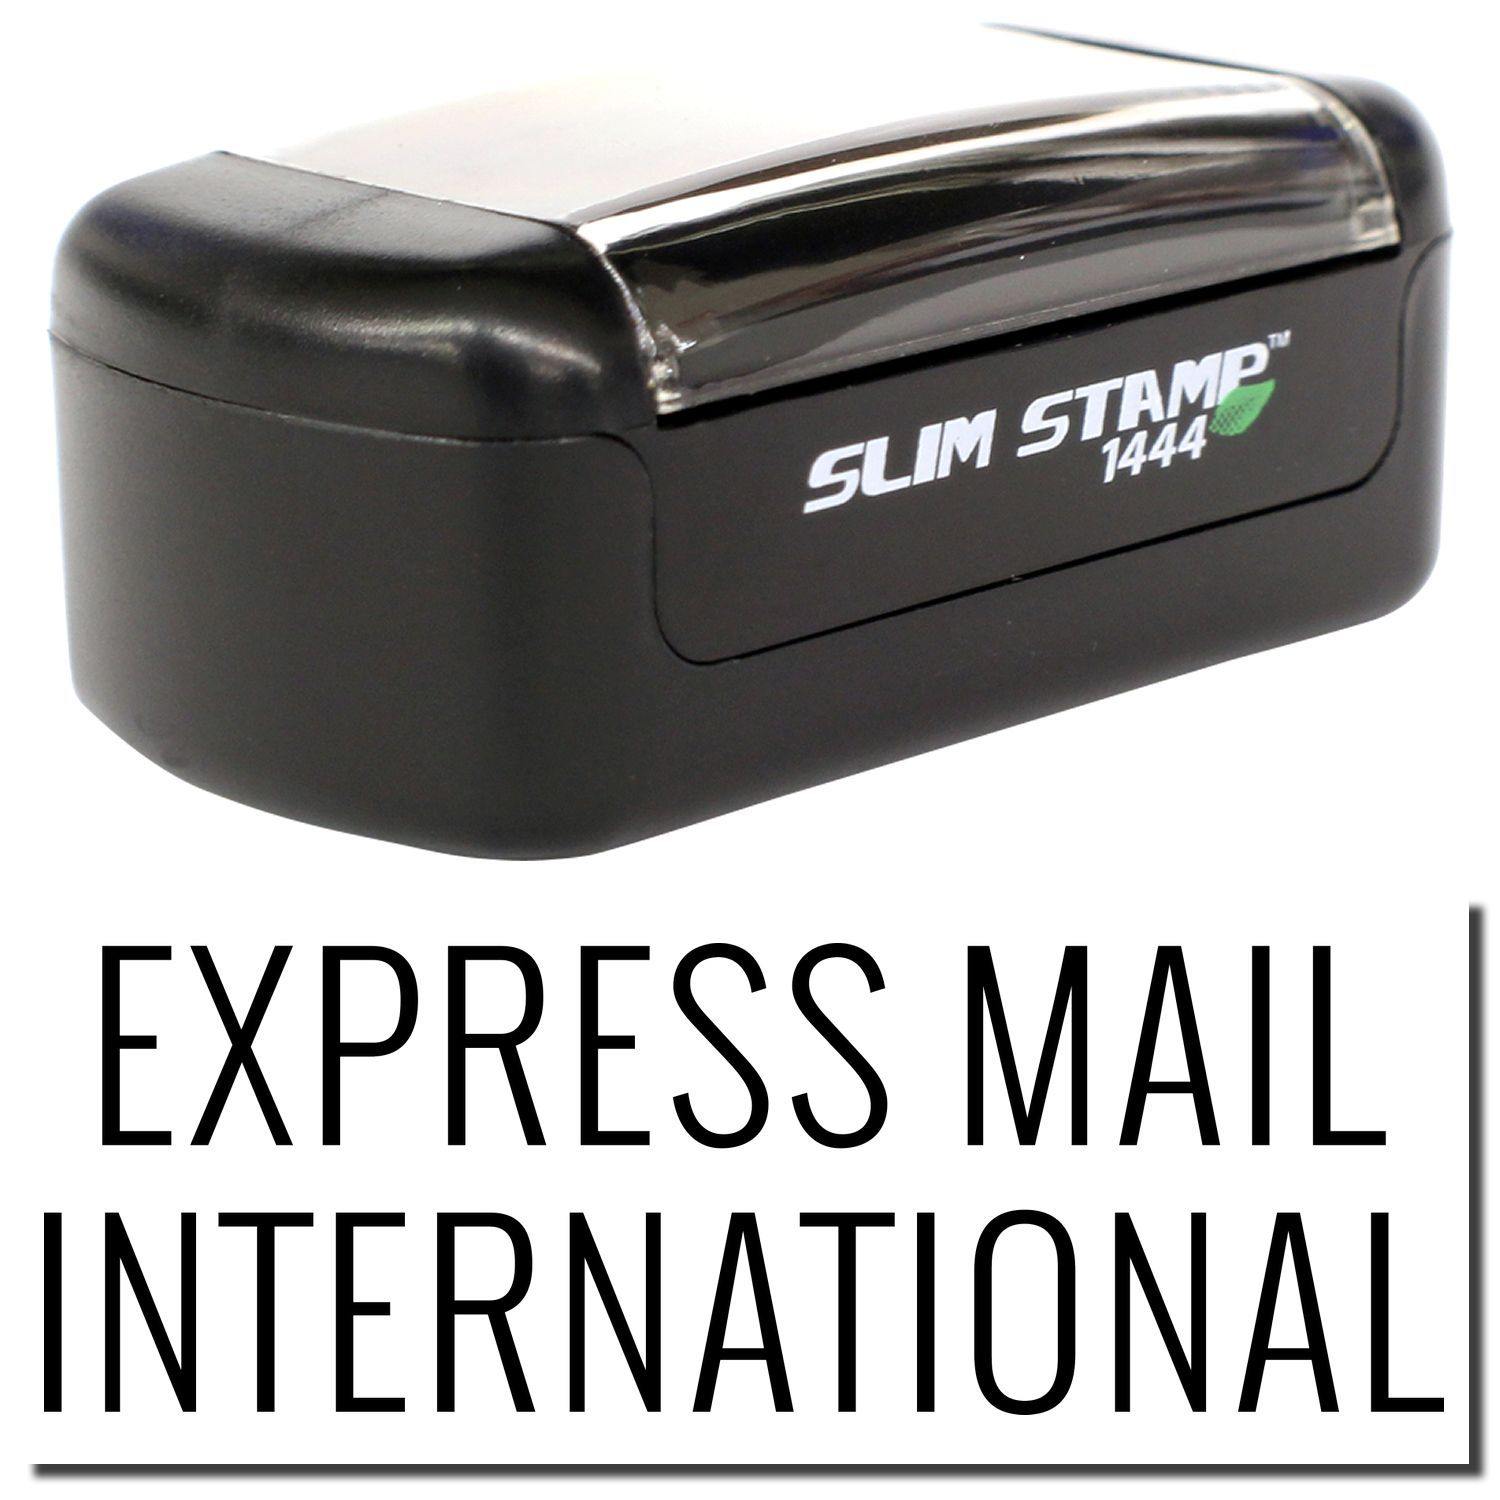 A stock office pre-inked stamp with a stamped image showing how the text "EXPRESS MAIL INTERNATIONAL" is displayed after stamping.